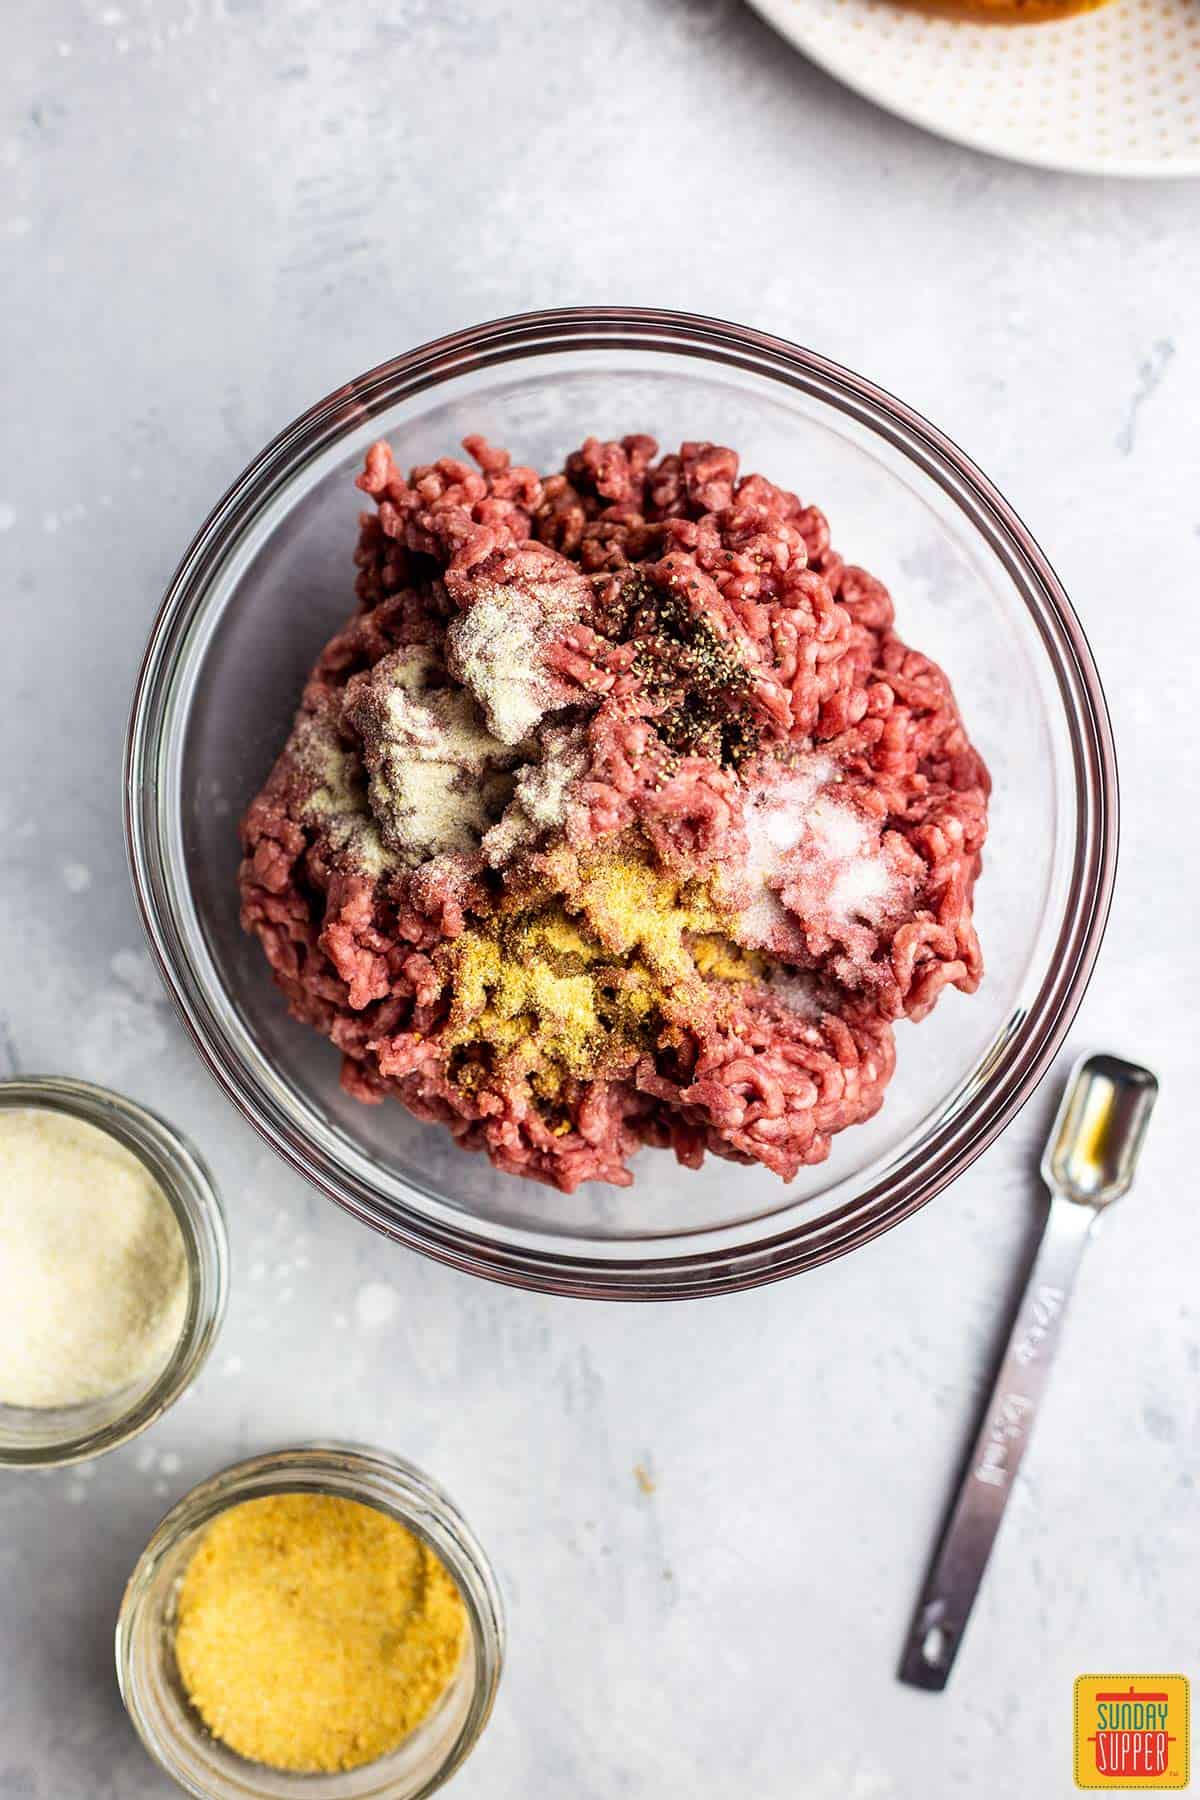 Mixing the ground beef mixture to make an air fryer burger